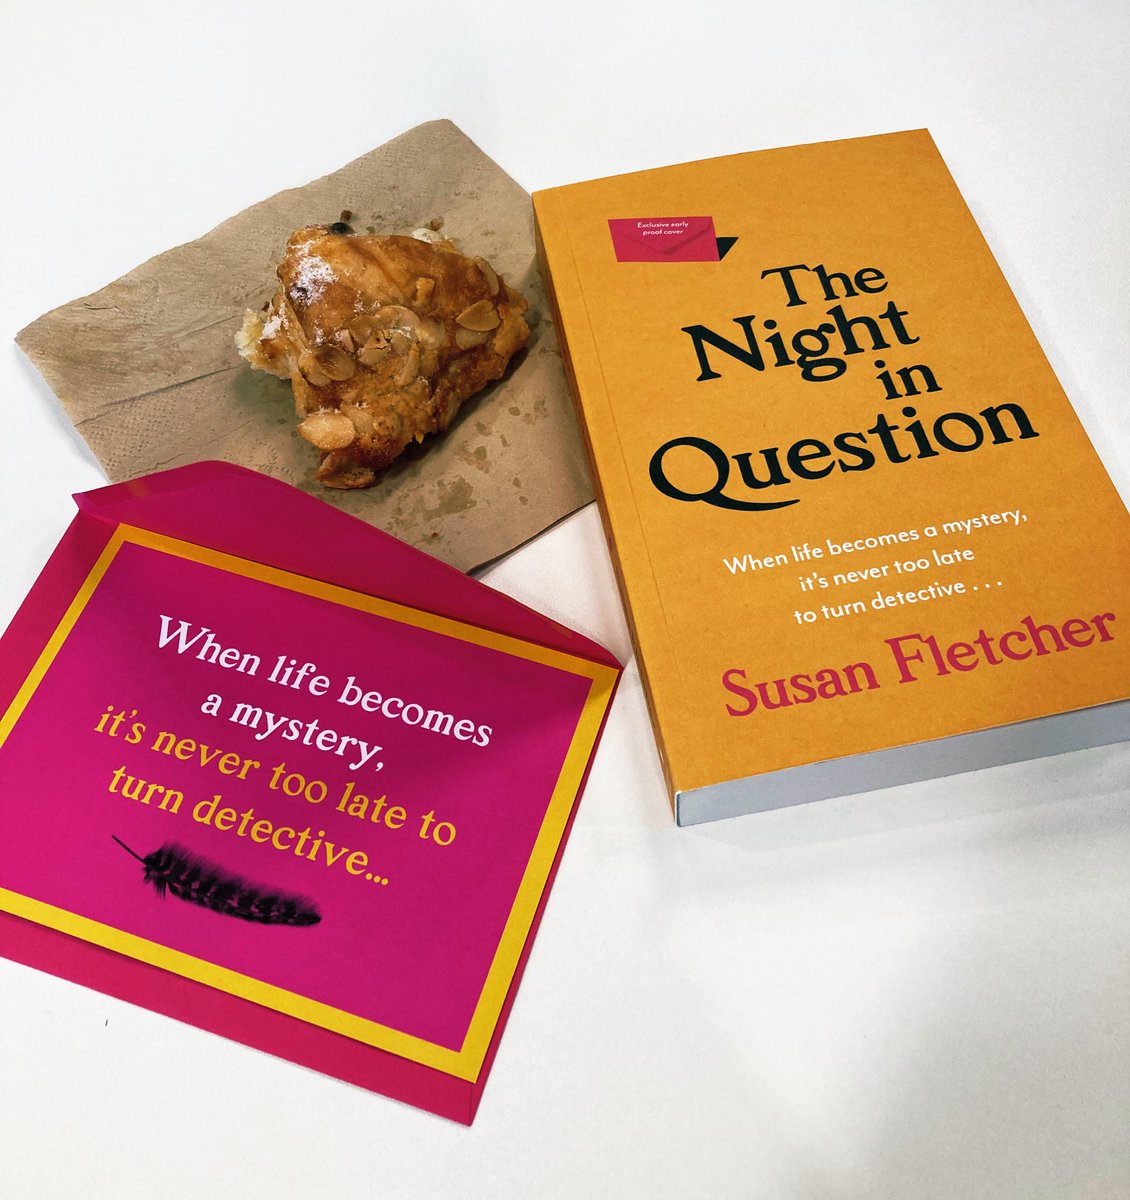 So excited to read my proof of #TheNightInQuestion by @sfletcherauthor! (Excuse my half-eaten croissant - it was too yum to wait 😂)